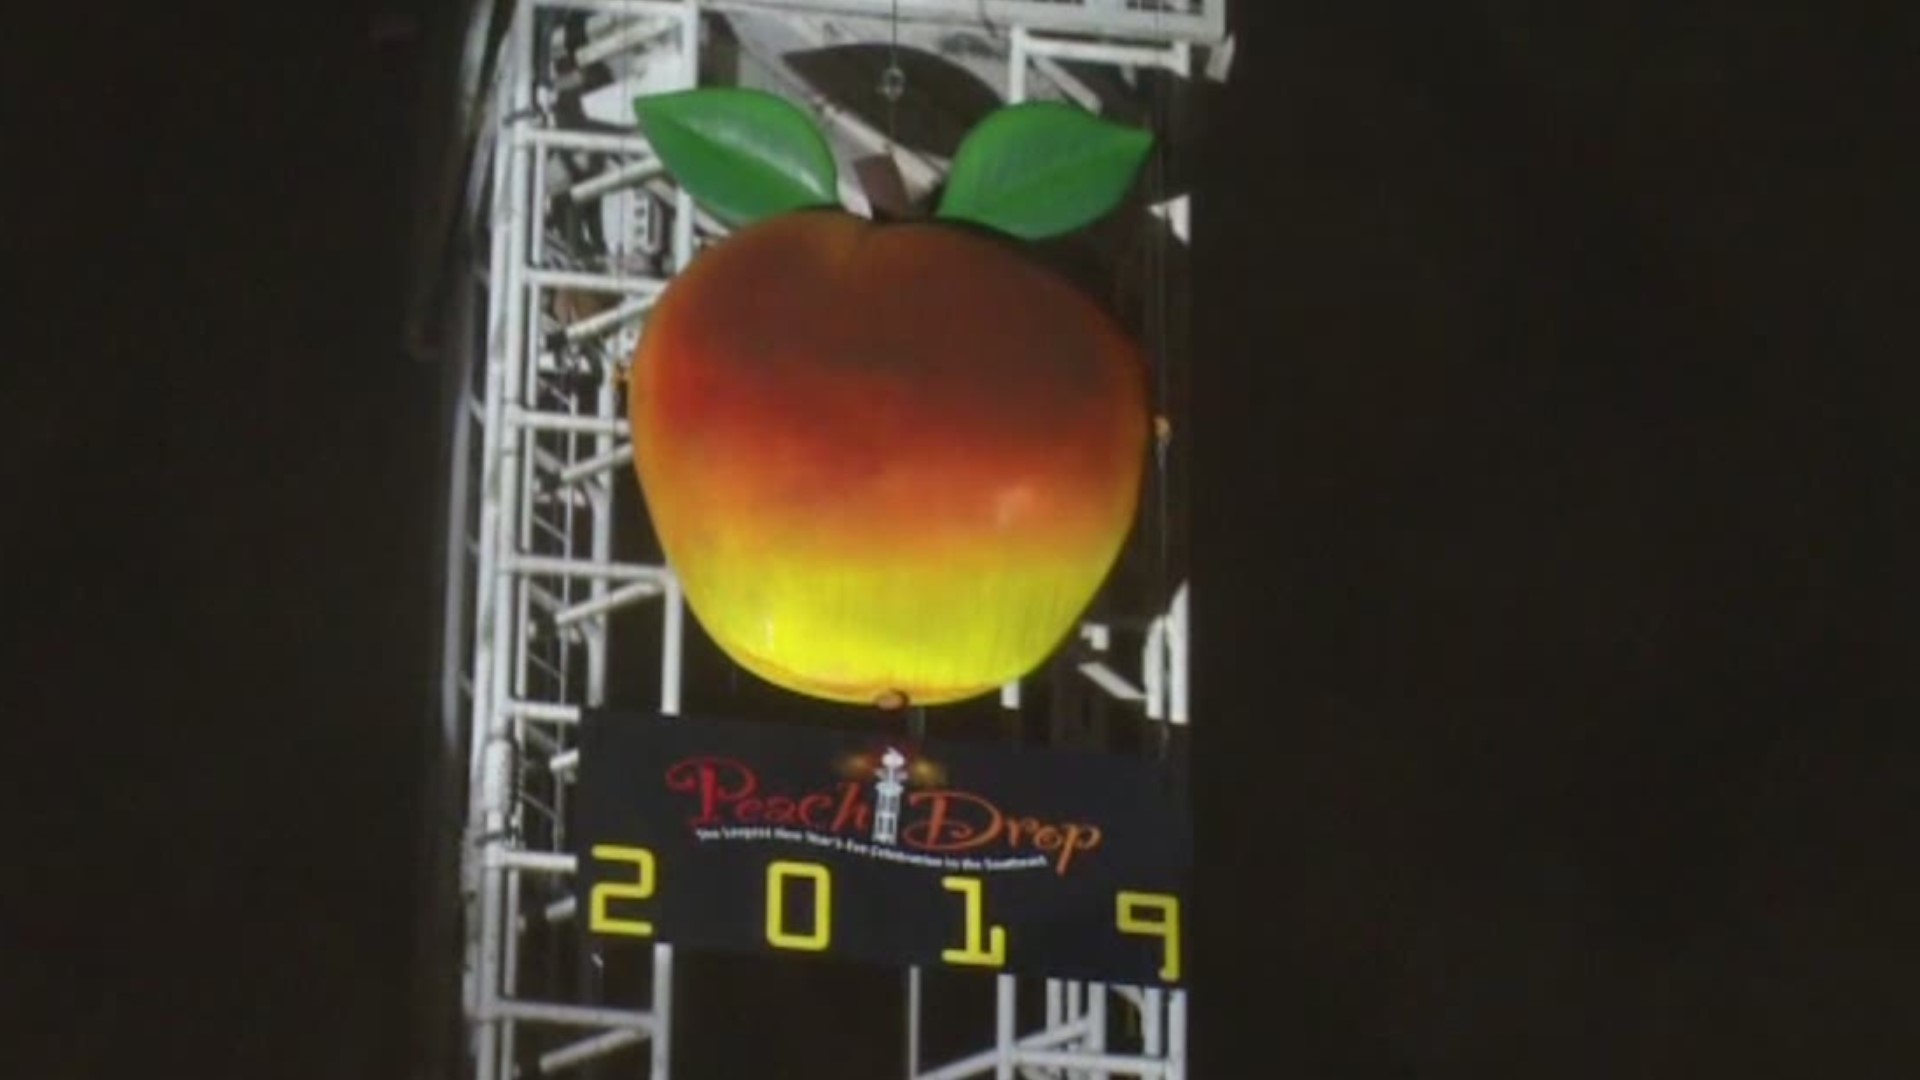 Rain didn't stop Atlantans from ringing in the New Year with music, fireworks and, of course, the Peach Drop!